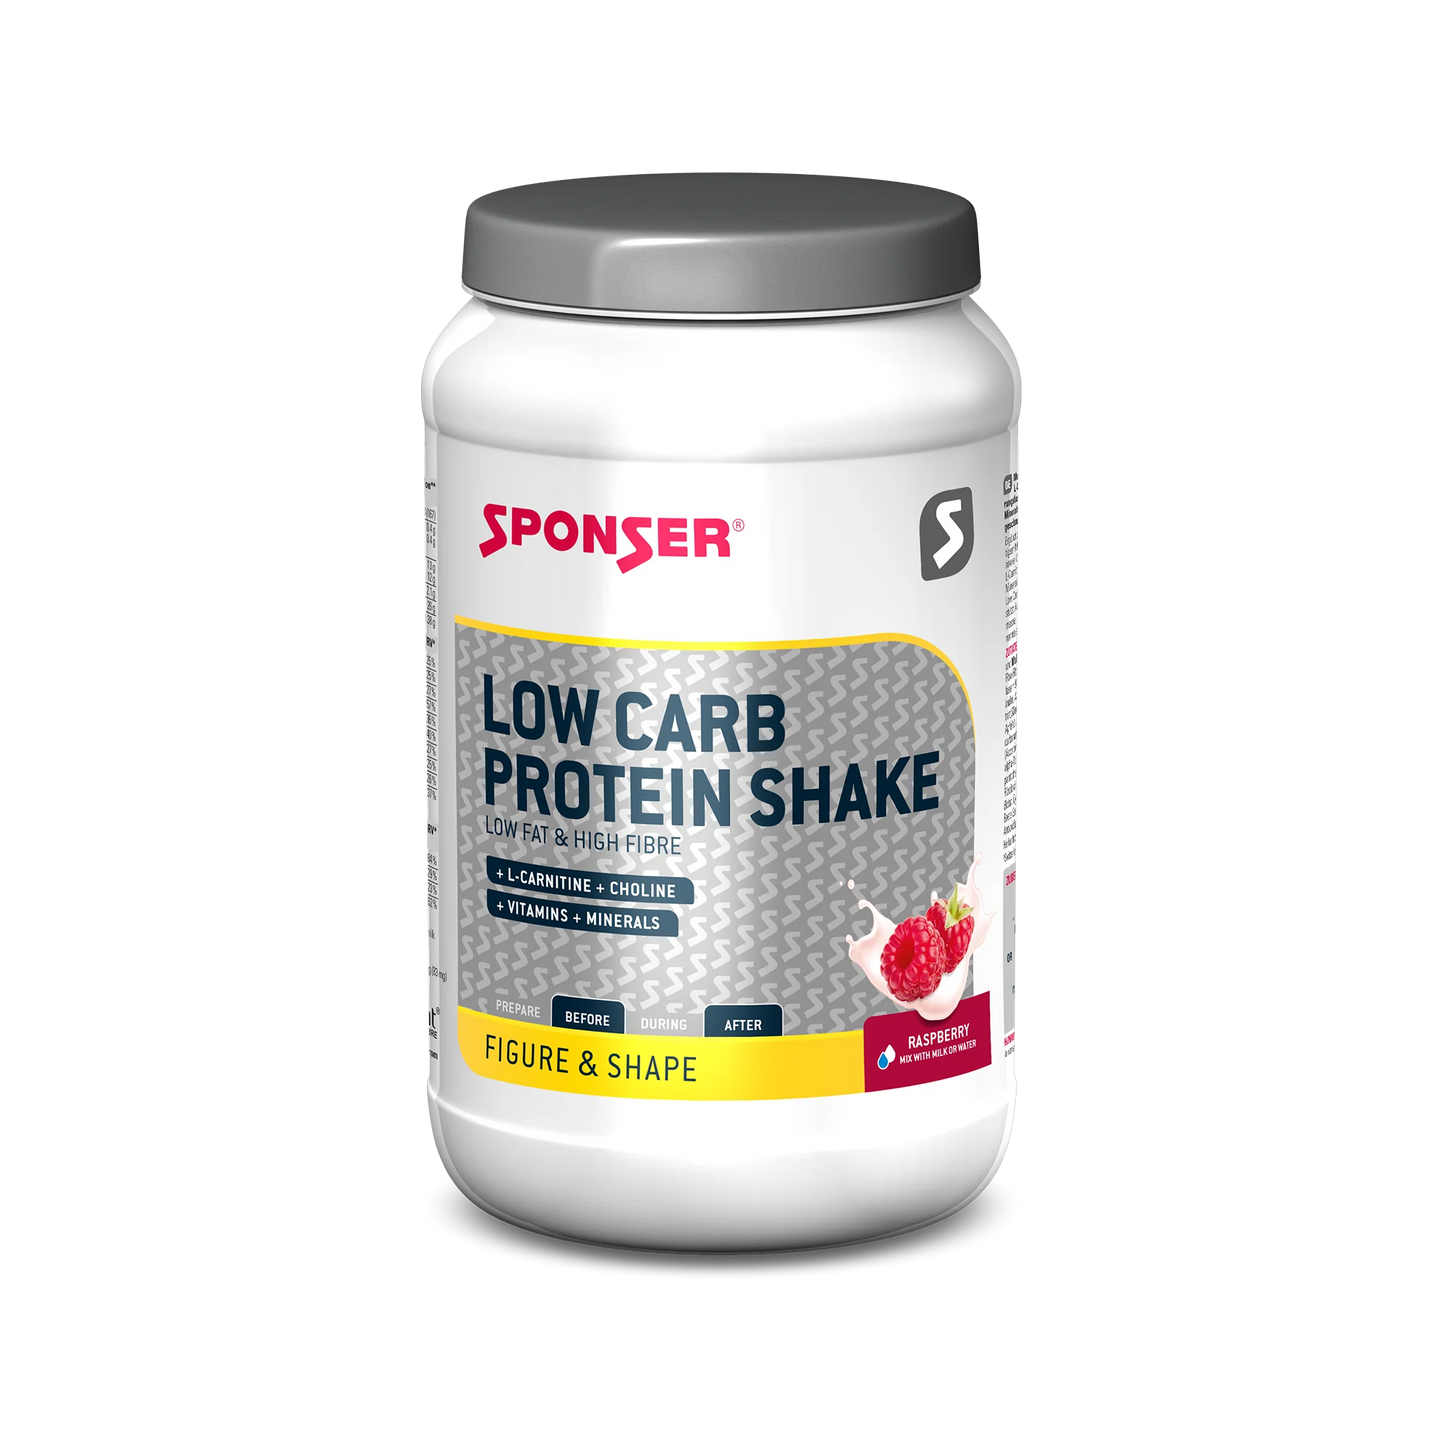 SPONSER LOW CARB PROTEIN SHAKE